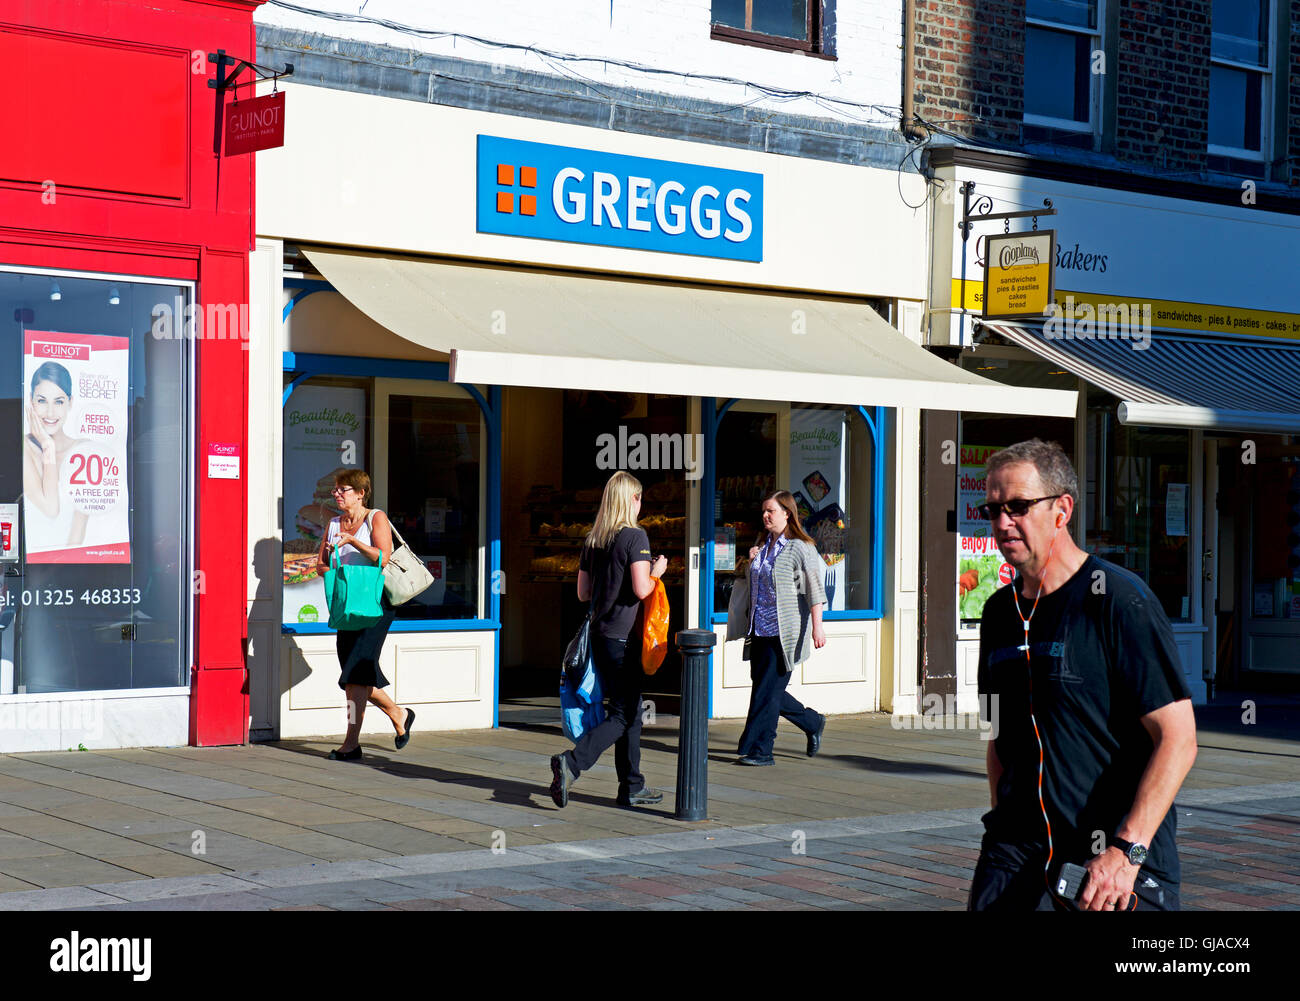 Branch of Greggs the bakers, England UK Stock Photo